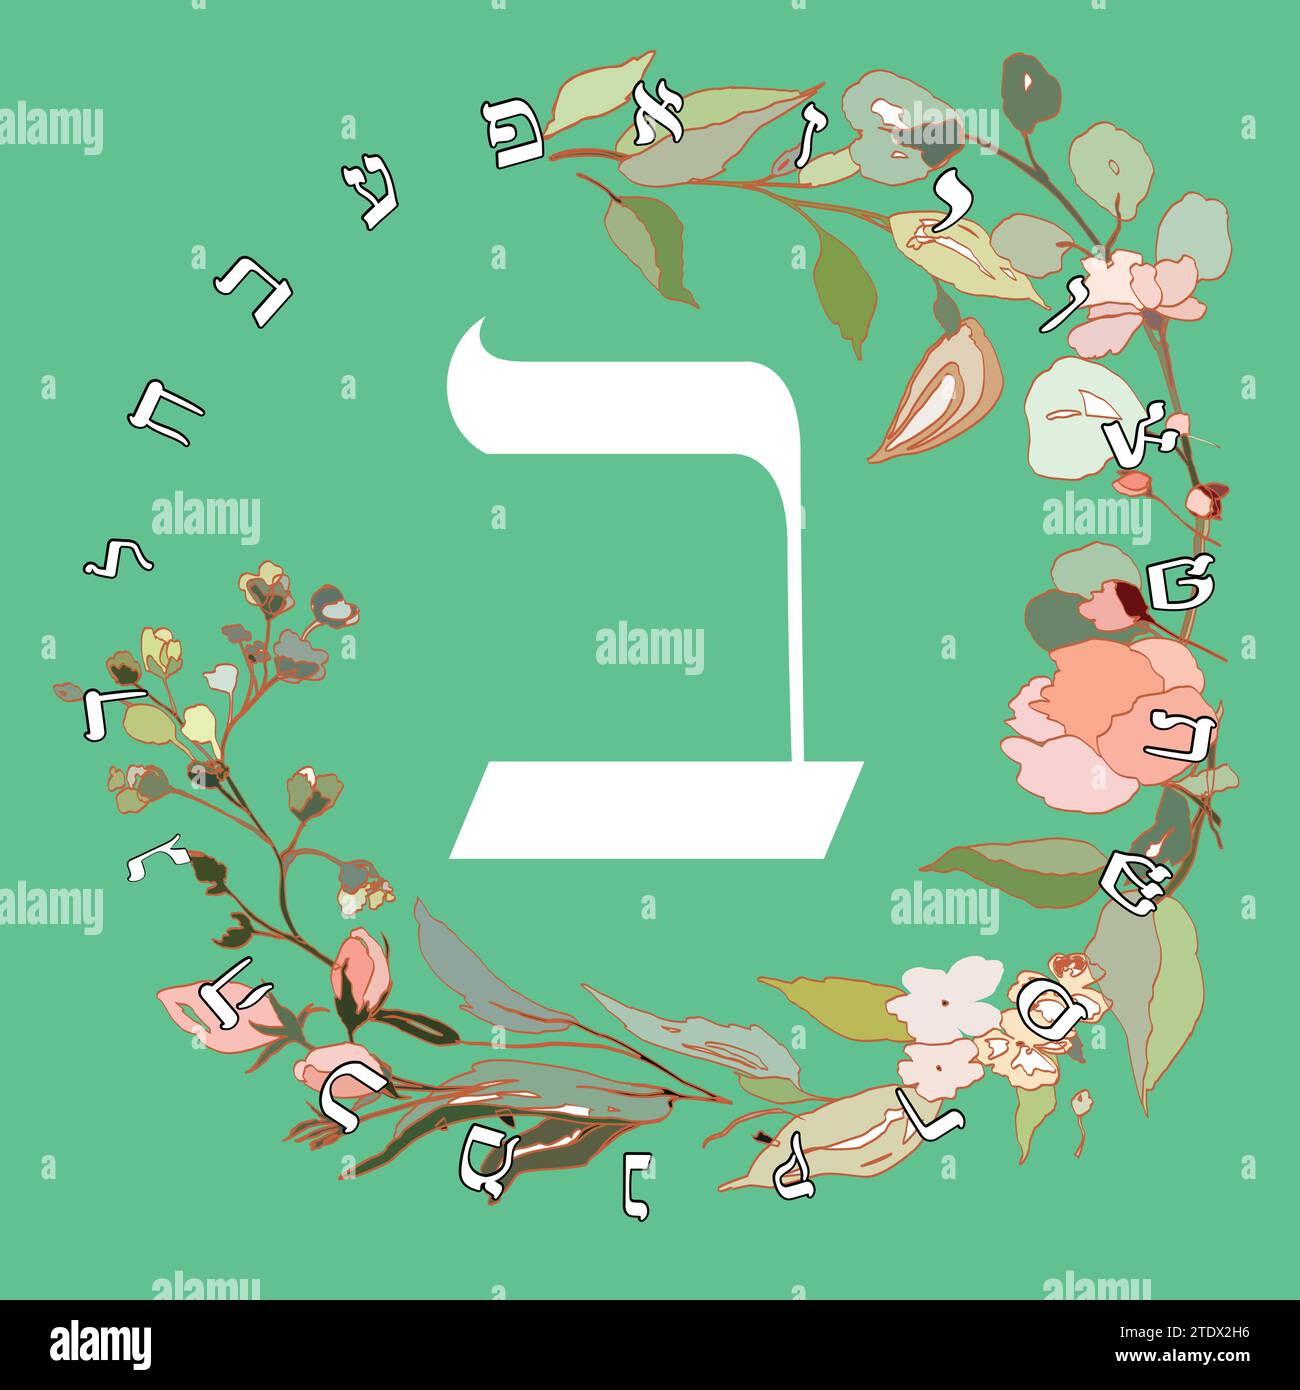 Vector illustration of the Hebrew alphabet with floral design. Hebrew letter called Beth white on green background. Stock Vector